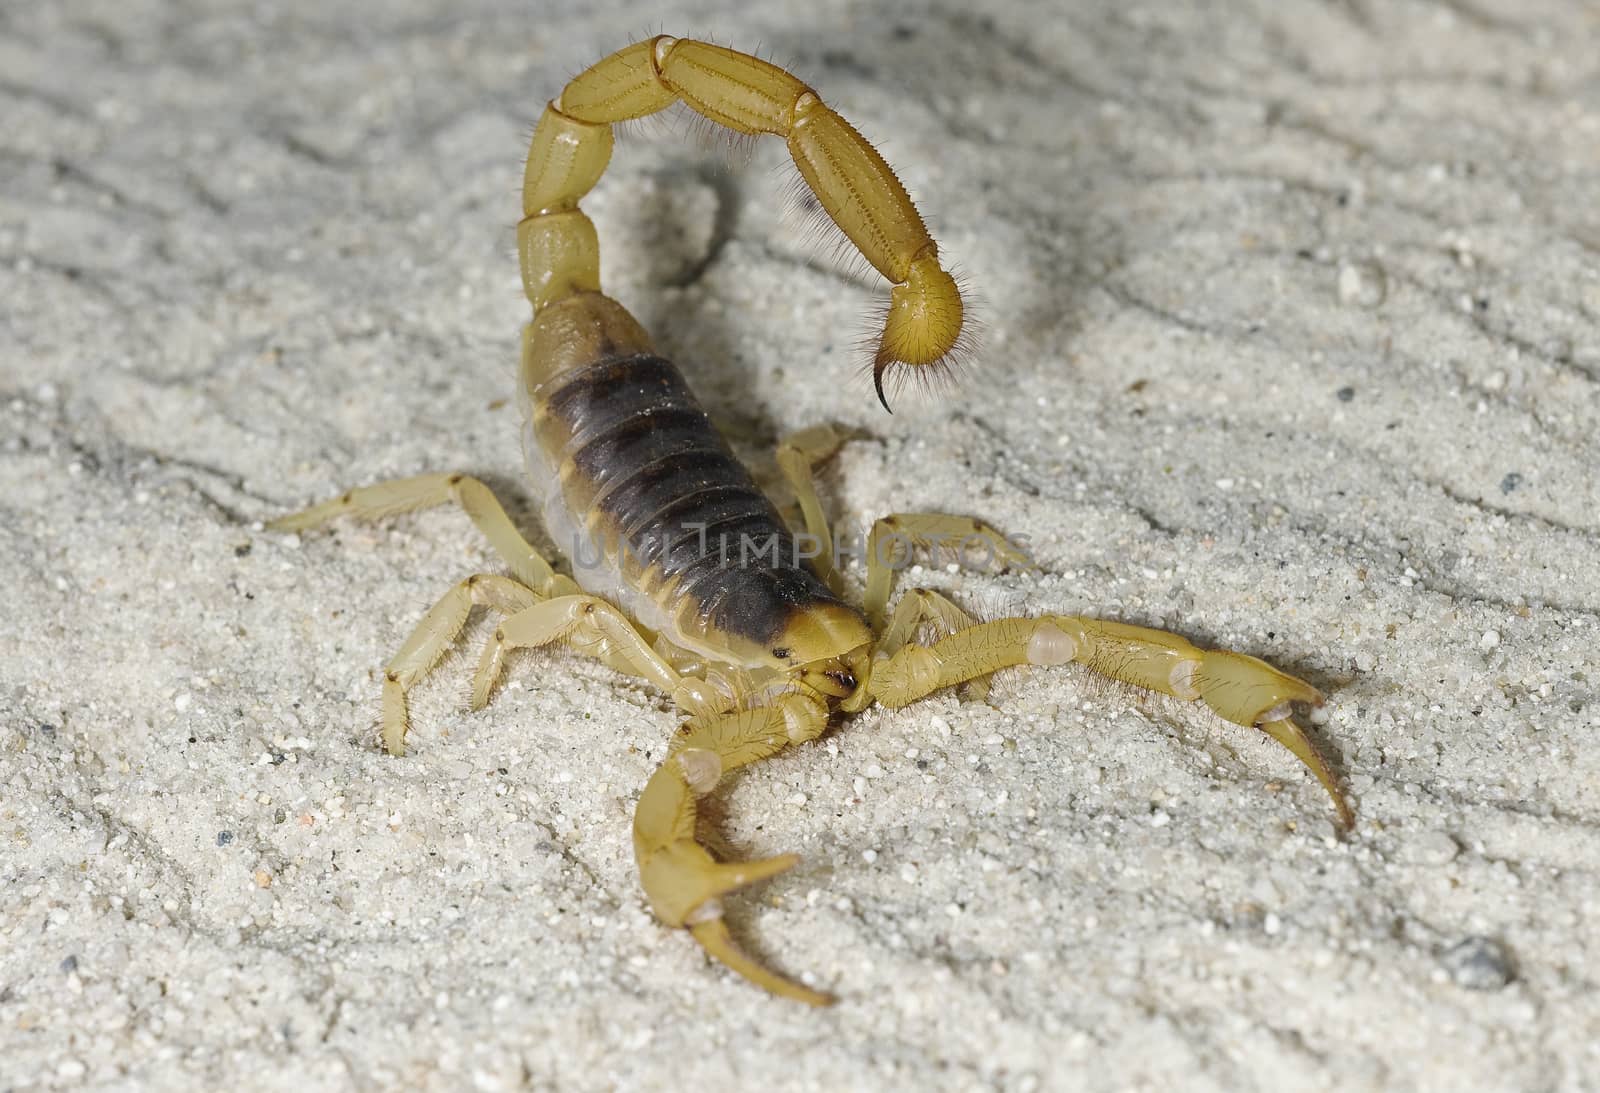 Scorpion with tail up by Njean